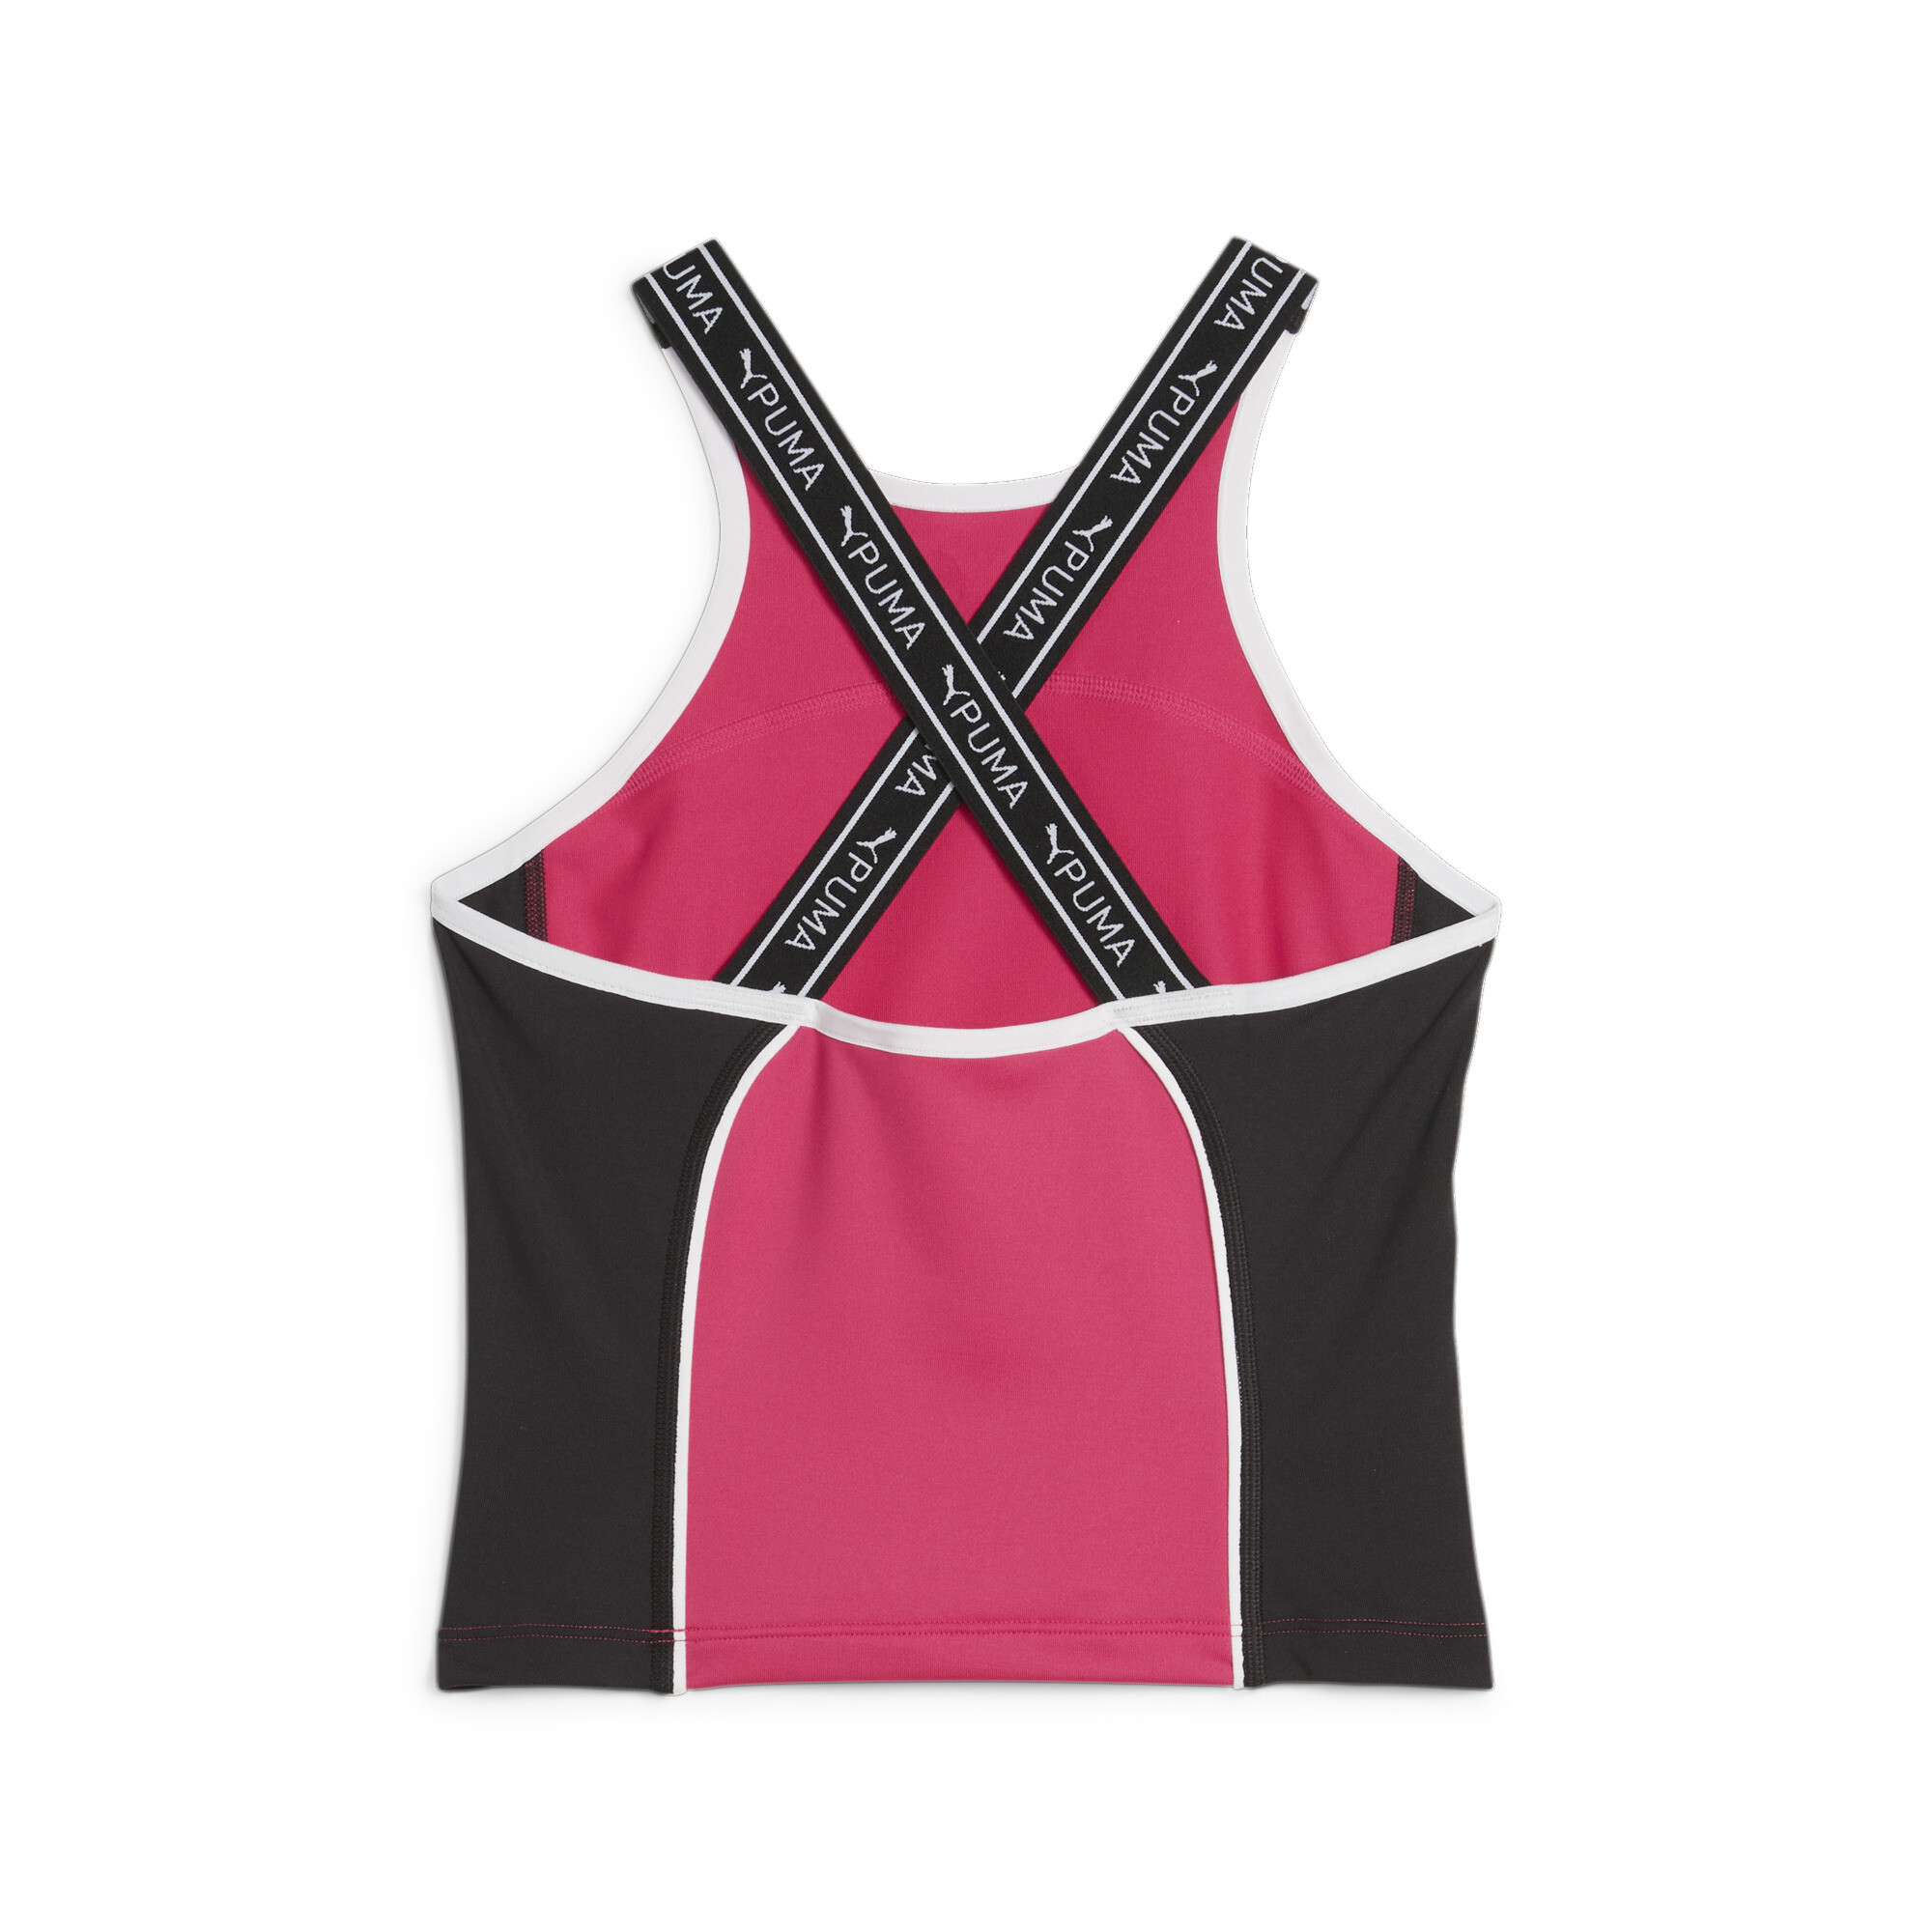 Women's PUMA FIT Fitted Tank In Pink, Size Medium